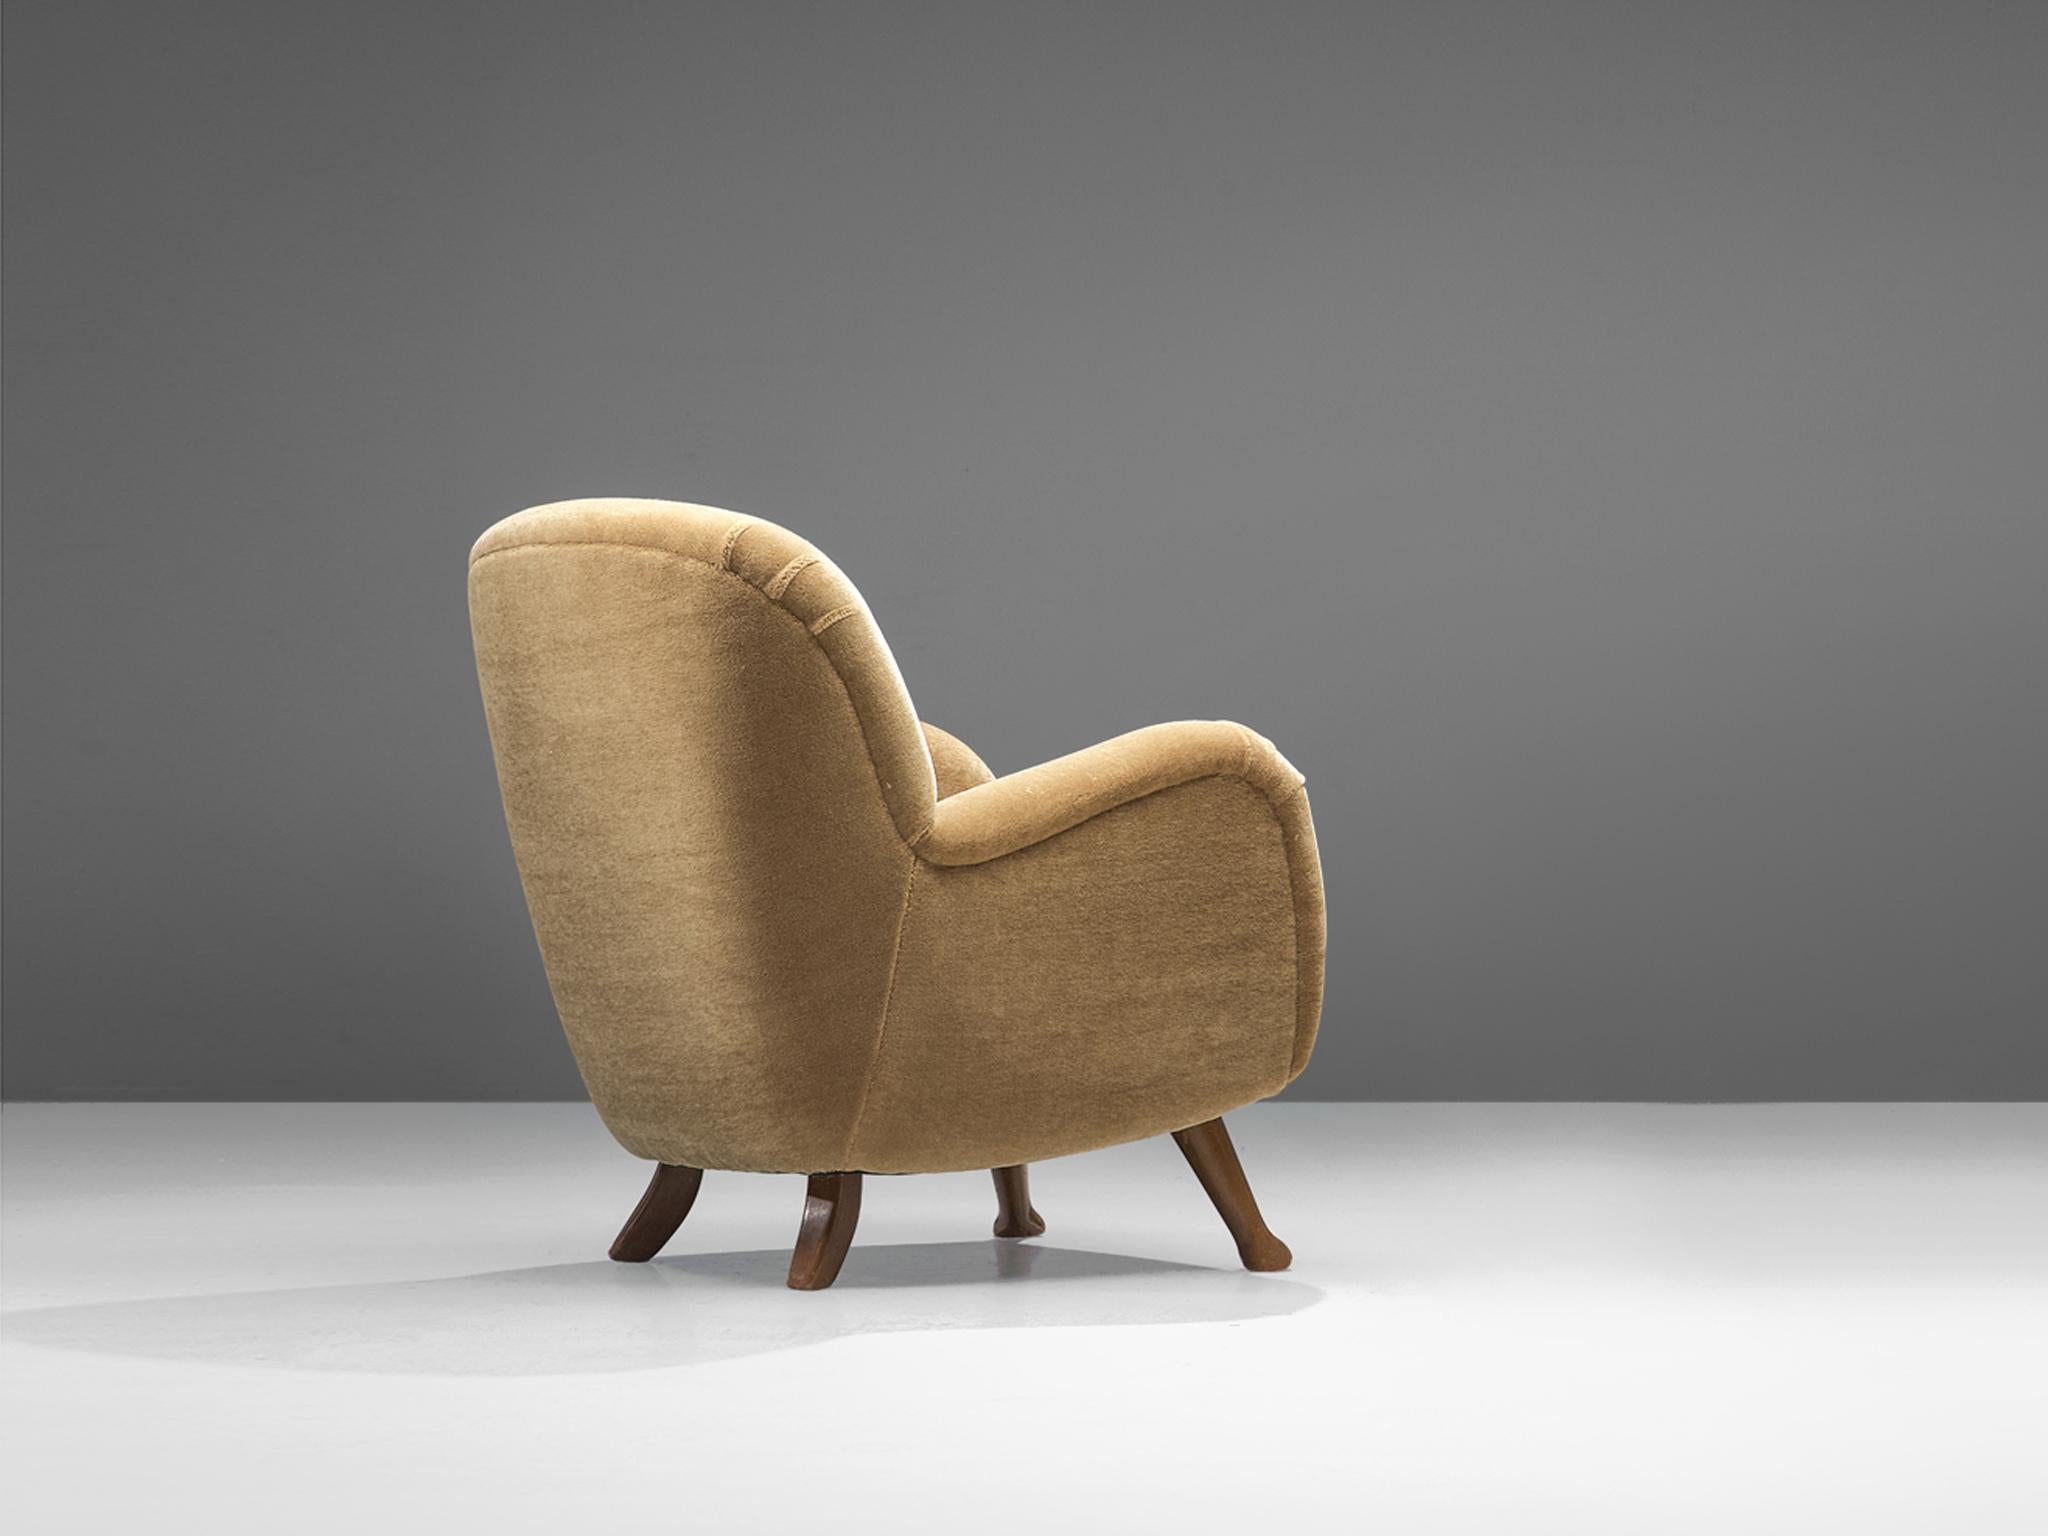 Mid-20th Century Berga Mobler Lounge Chair in Beige Teddy  For Sale